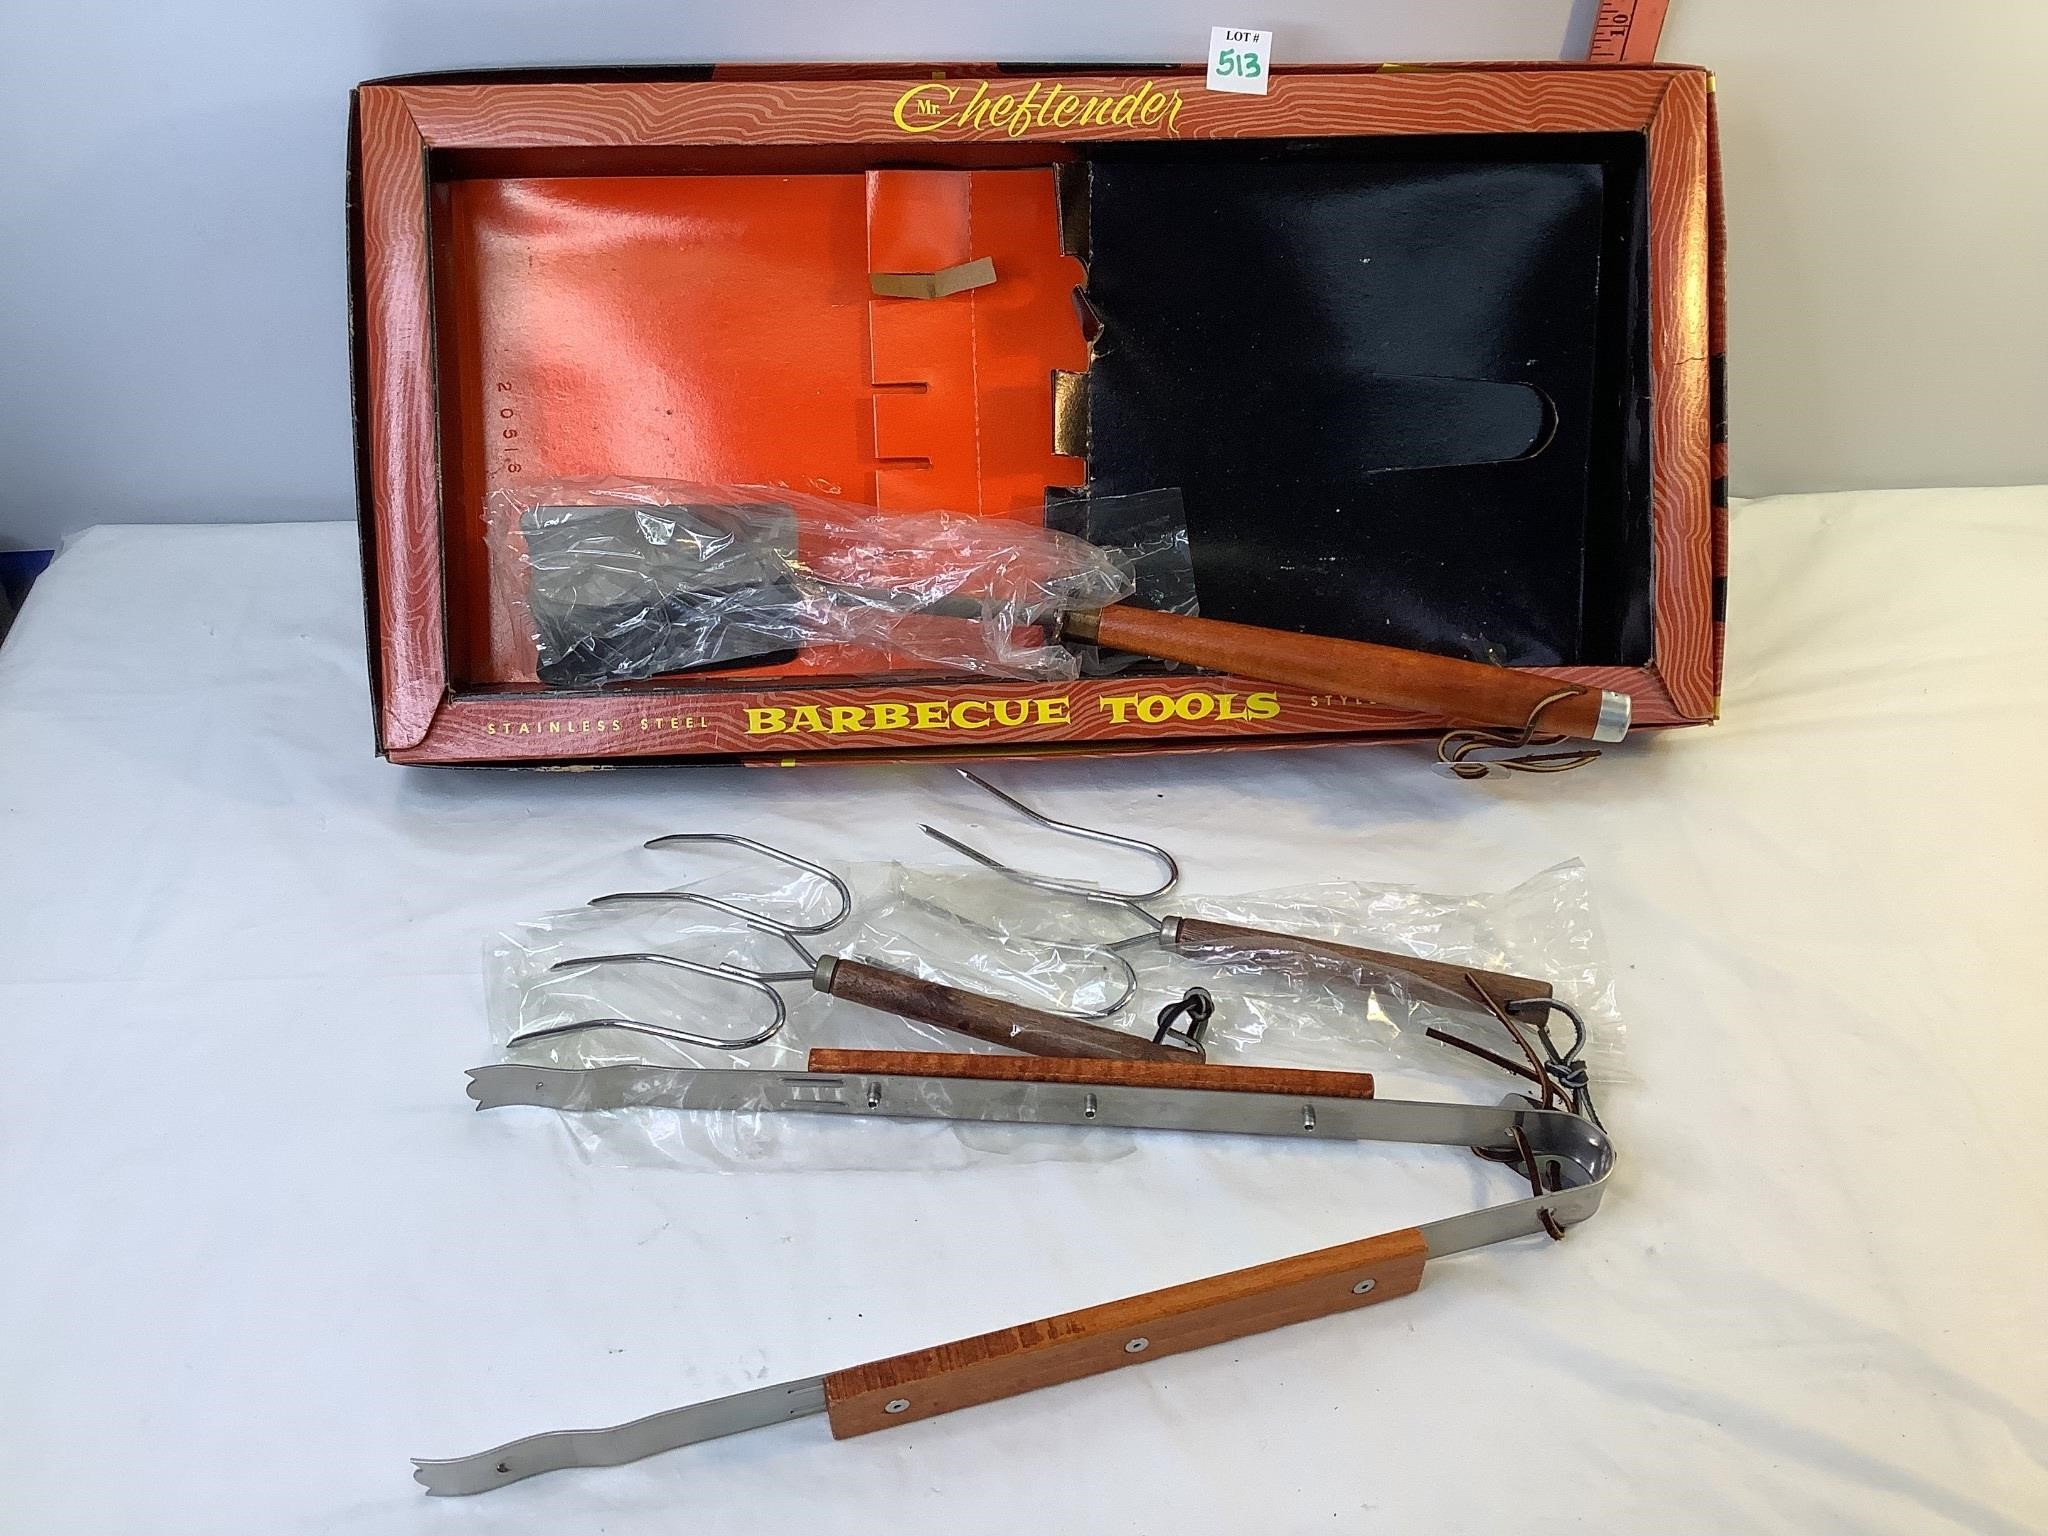 Mr. Cheftender Barbecue Tools